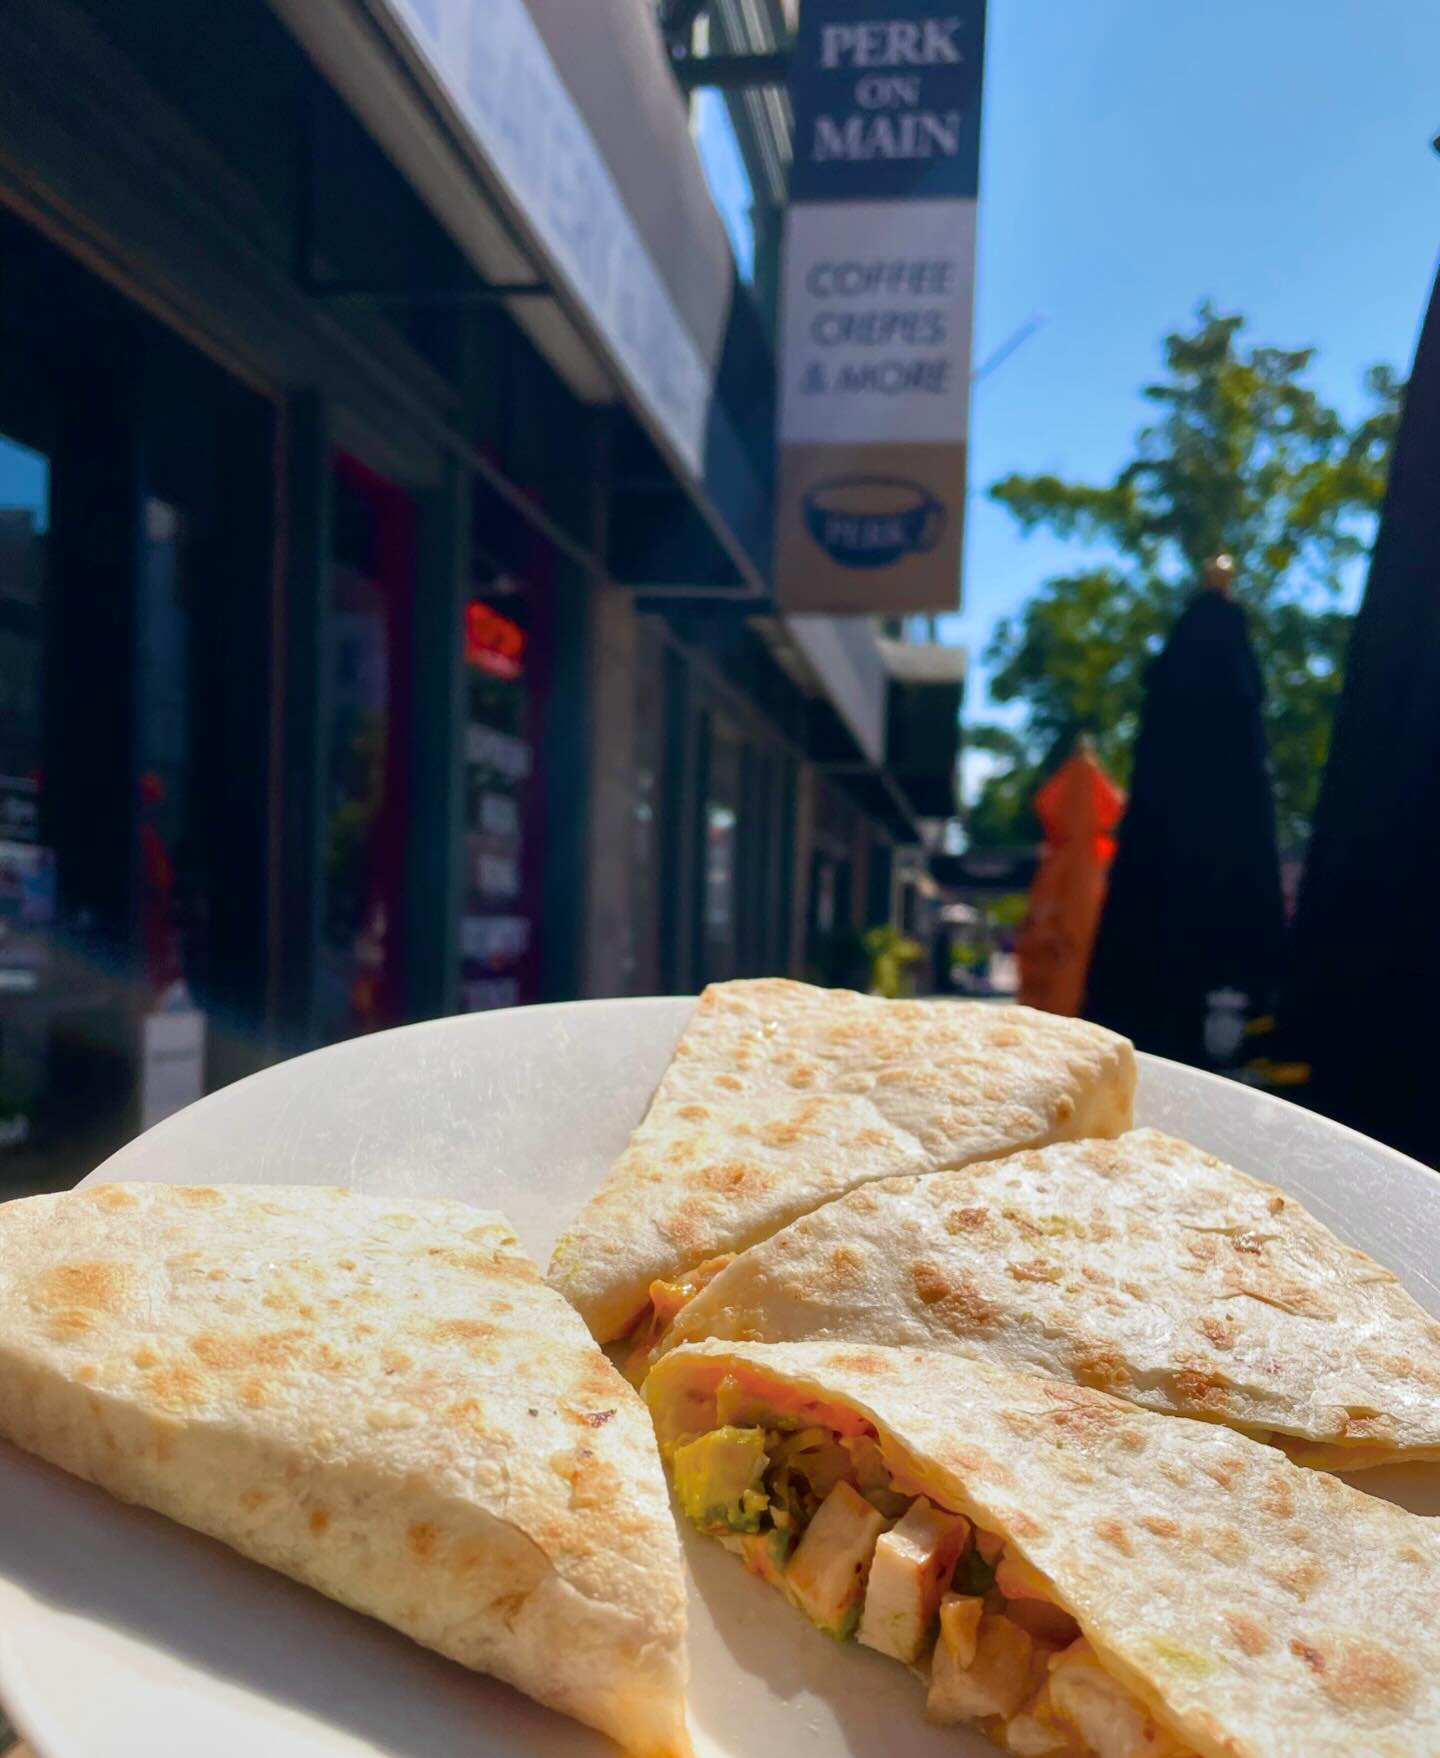 Ahhhh warm sunshine and quesadillas! Lunch SOLVED! 😋